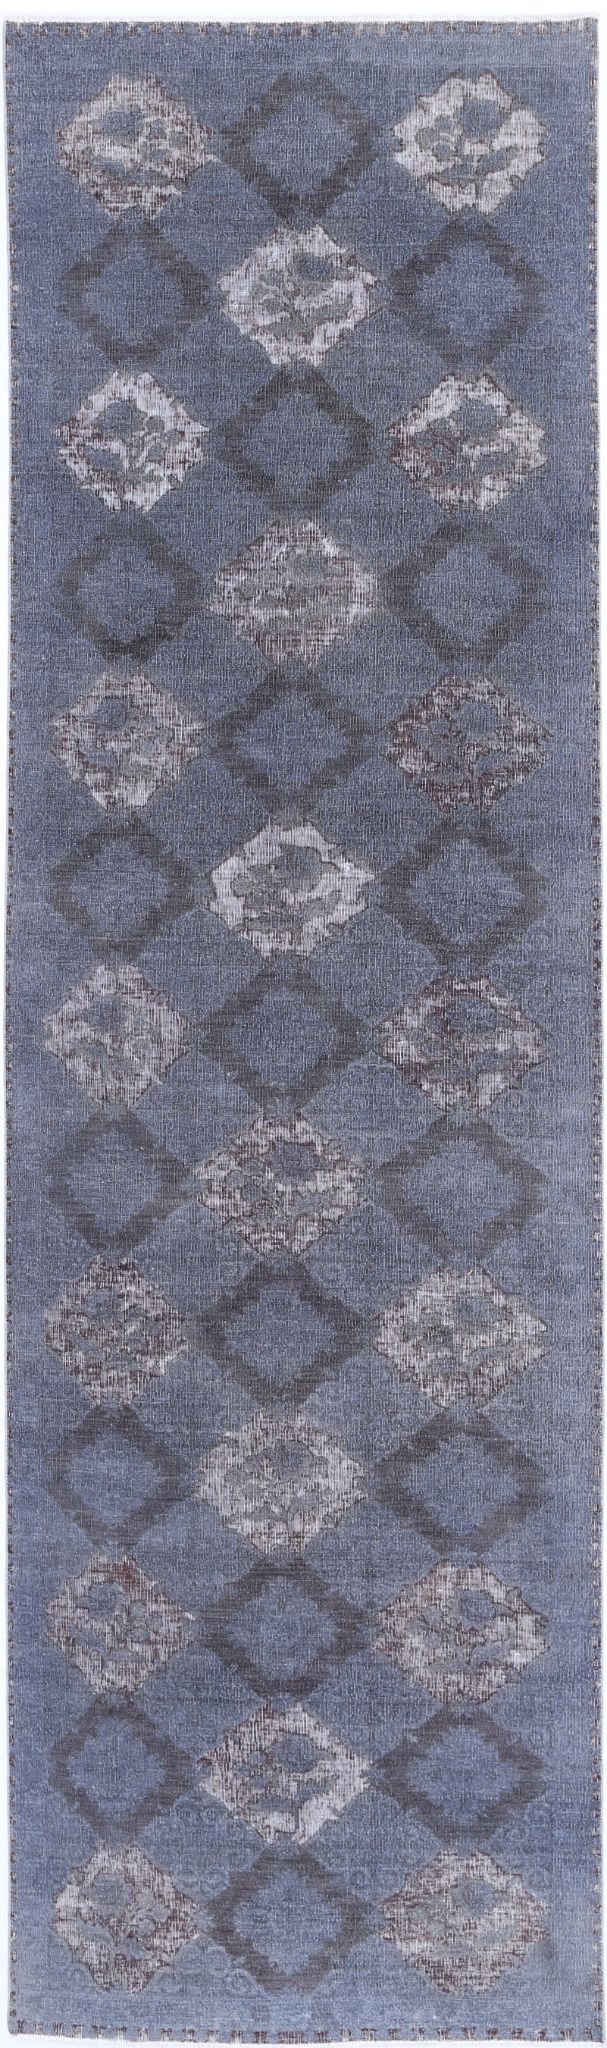 Hand Knotted Onyx Wool Rug - 4'0'' x 14'2''